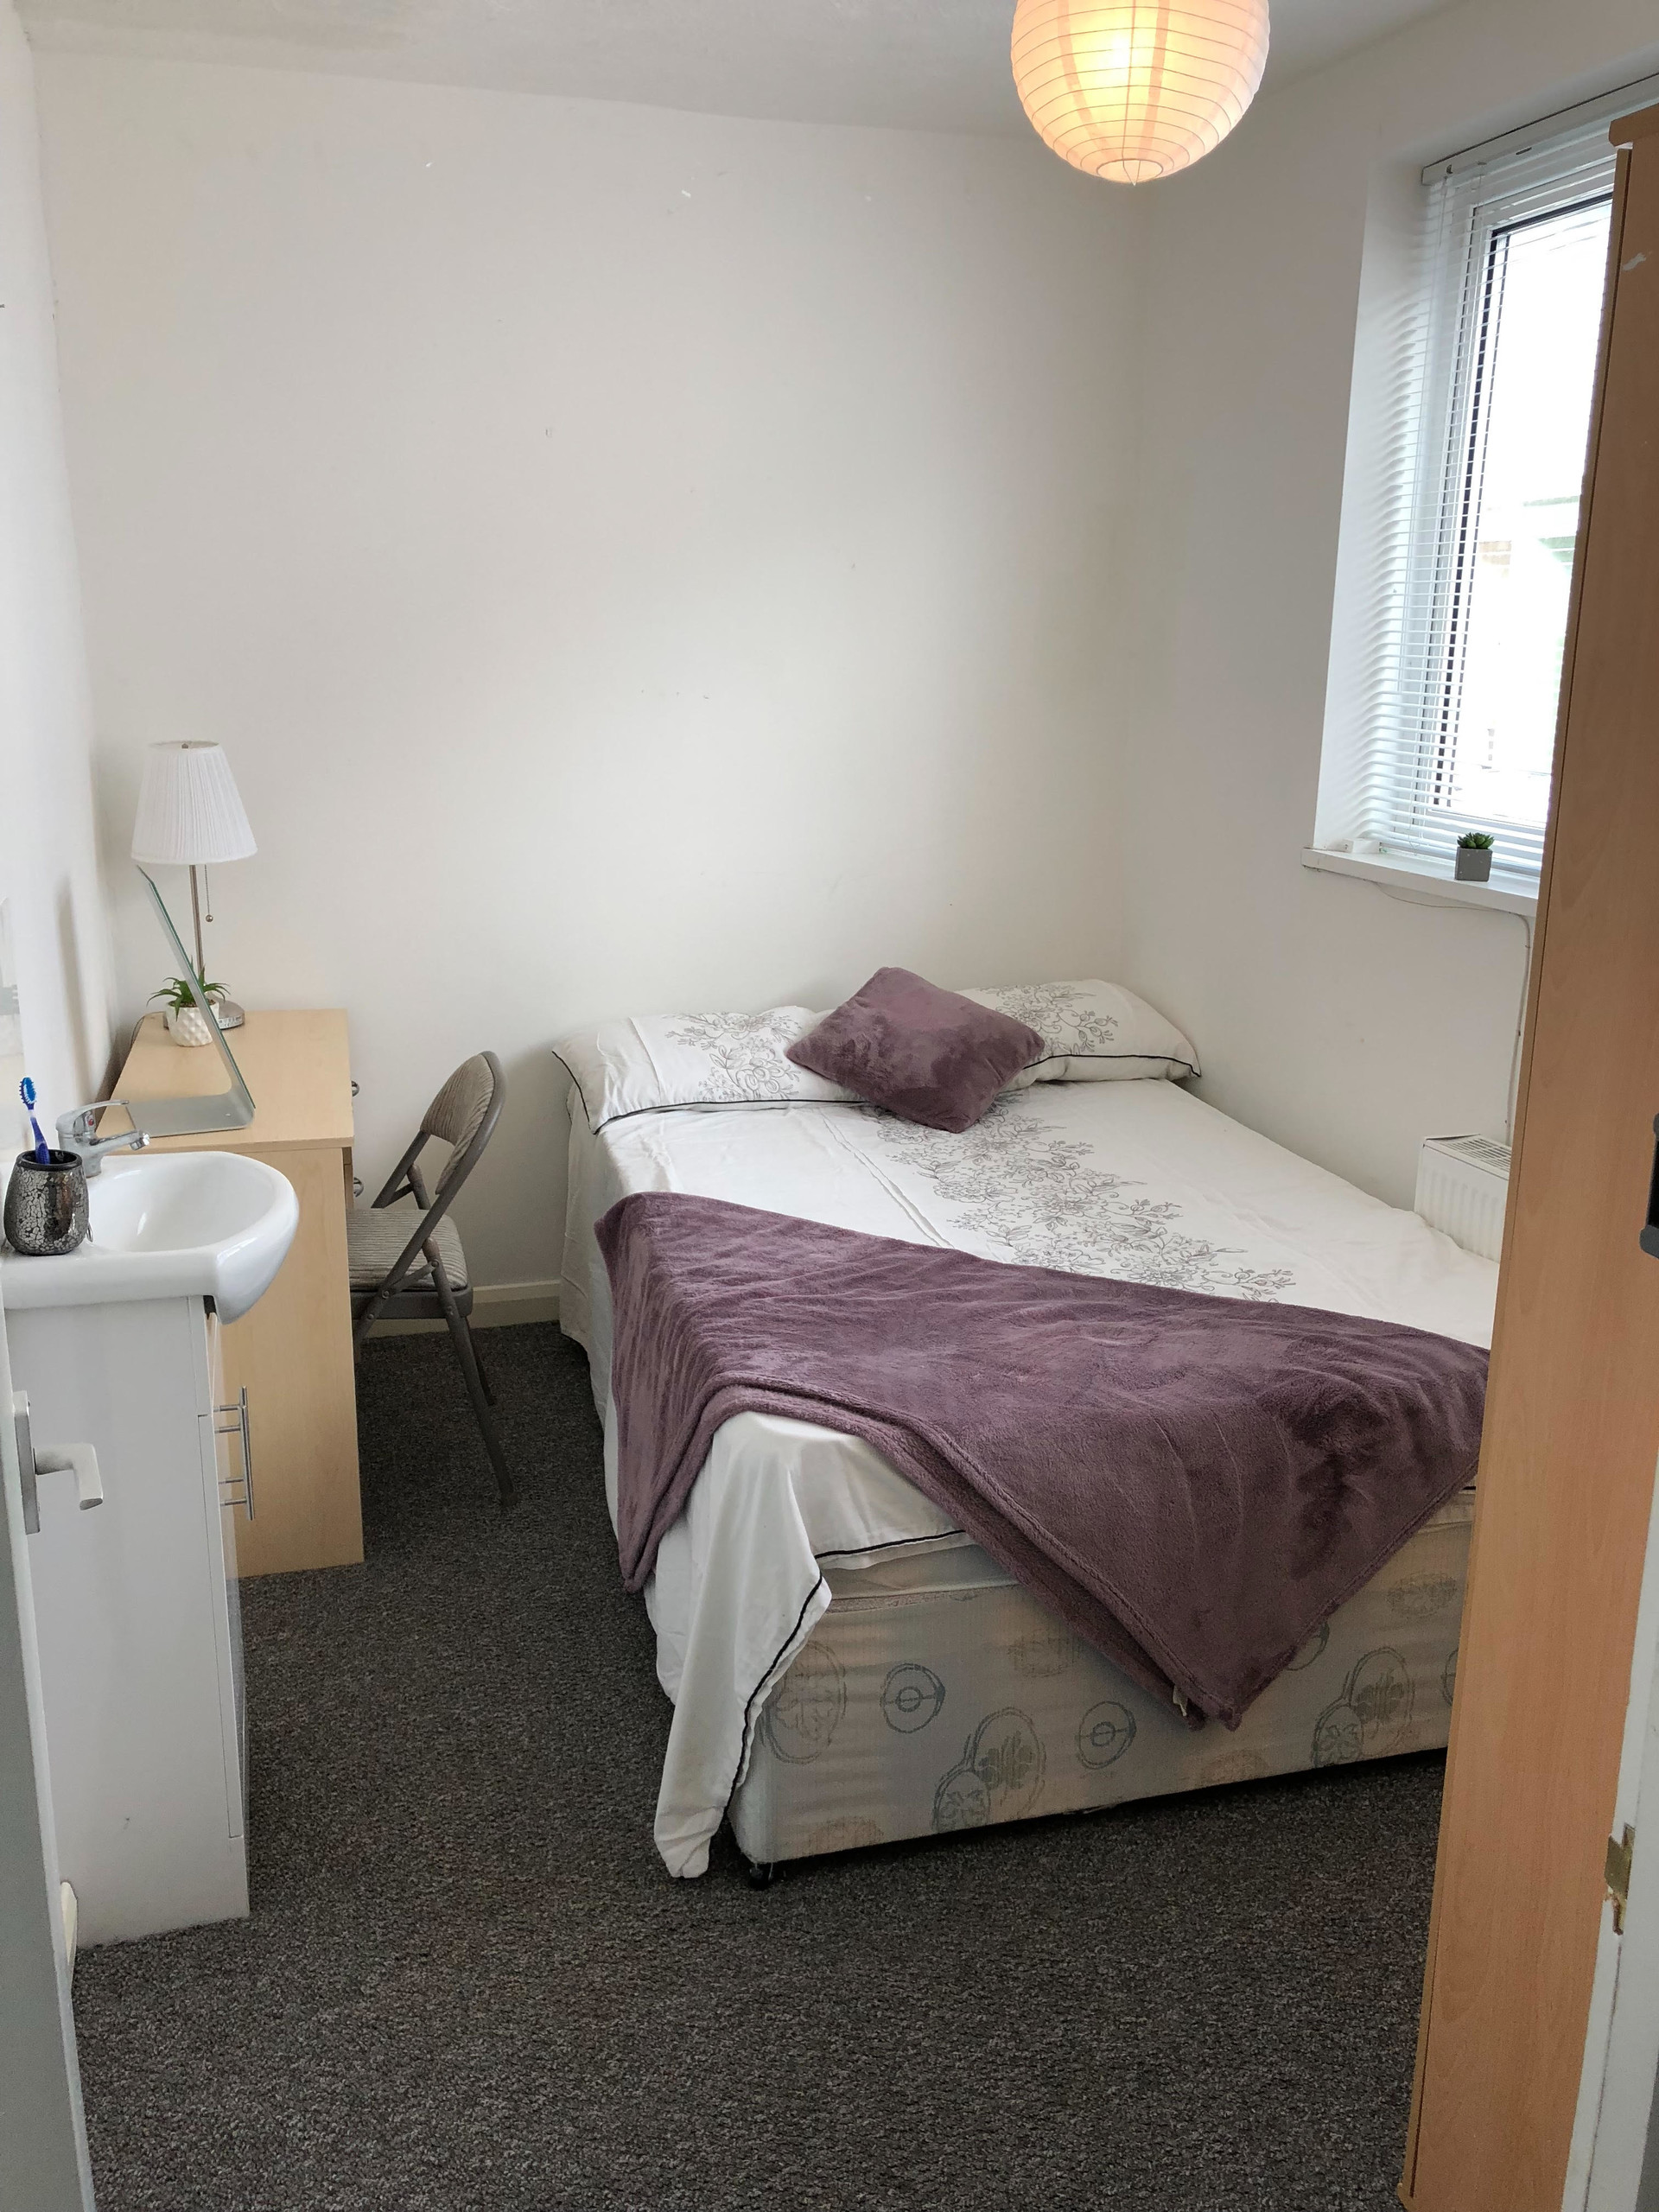 Room in a shared house in Brighton | Room for rent Brighton